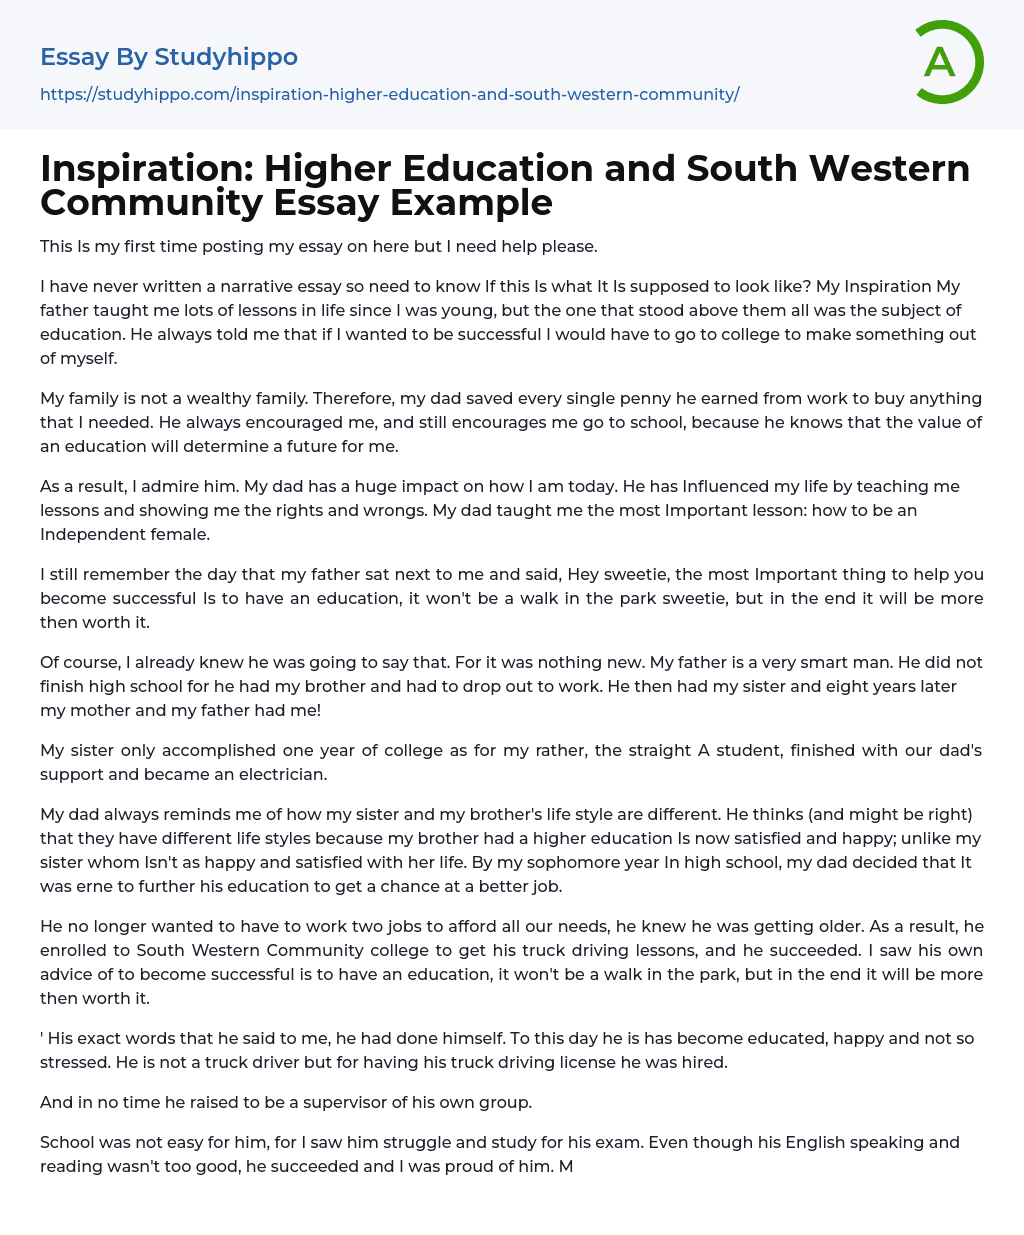 Inspiration: Higher Education and South Western Community Essay Example